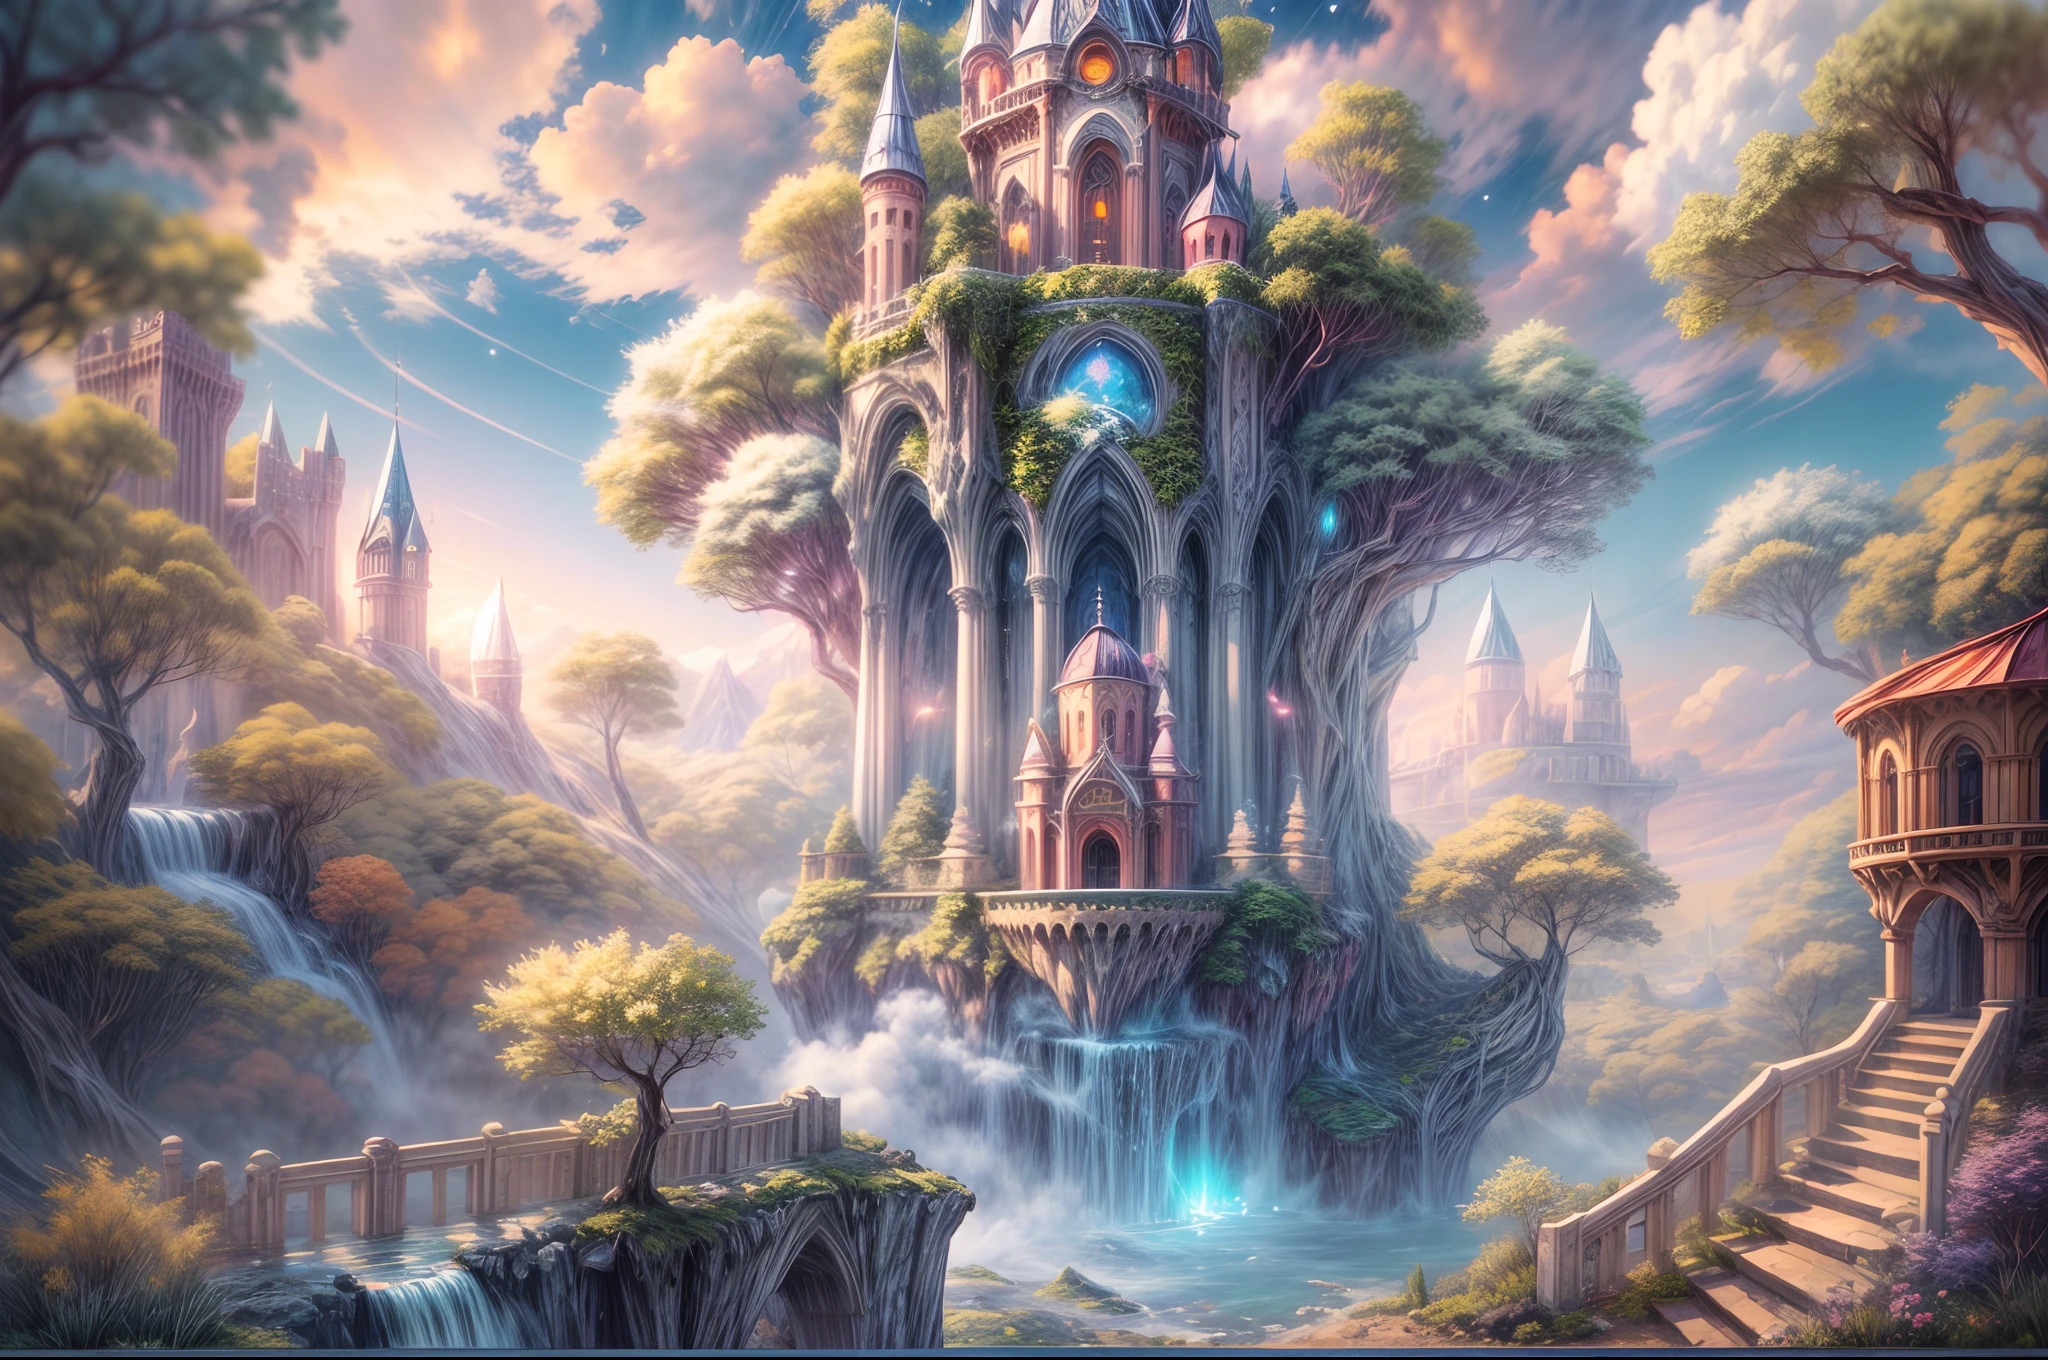 Generate a realistic fantasy landscape with beautiful, ornate romantic buildings, floating islands, crystalline waterfalls streaming from the floating islands, and a dreamy landscape of highly detailed flowers and dreamy watercolors. This is the (((romantic))) realm of the gods. (((The castles look like they are carved from shimmering marble, with distinct and complex details adding to their realism.))) Cotton candy clouds wisp into beautiful glittering stars across the colorful sky, with mesmerizing pink and purple celestial lights creating an enchanting atmosphere. Include many different levels and high visual interest. The environment is large and awe-inspiring, and this is a macro shot. The general ambience is peace, tranquility, and highly detailed sweetness. Include interesting fantasy elements with colors that complement the rest of the landscape. The sky should be very detailed. The landscape should very detailed. All buildings should be ornate with complex and intricate details. Include a luminous and magical atmosphere, magic bubbles, shimmering colors, many small fantasy details including iridescence, expertly created majestic landscapes, and shimmer and glimmer. Include lots of vibrant colors and vaguely surreal details. Camera: Utilize dynamic composition to create interest and excitement. CGI, unreal engine, unity engine, (((masterpiece))), high resolution, 8k, best quality, high quality, highres, 16, RAW, ultra highres, ultra details, finely detail, an extremely delicate and beautiful, extremely detailed, real shadow, anime, highly detailed painted, award-winning glamour painting, wonderful painting, art style, stylized